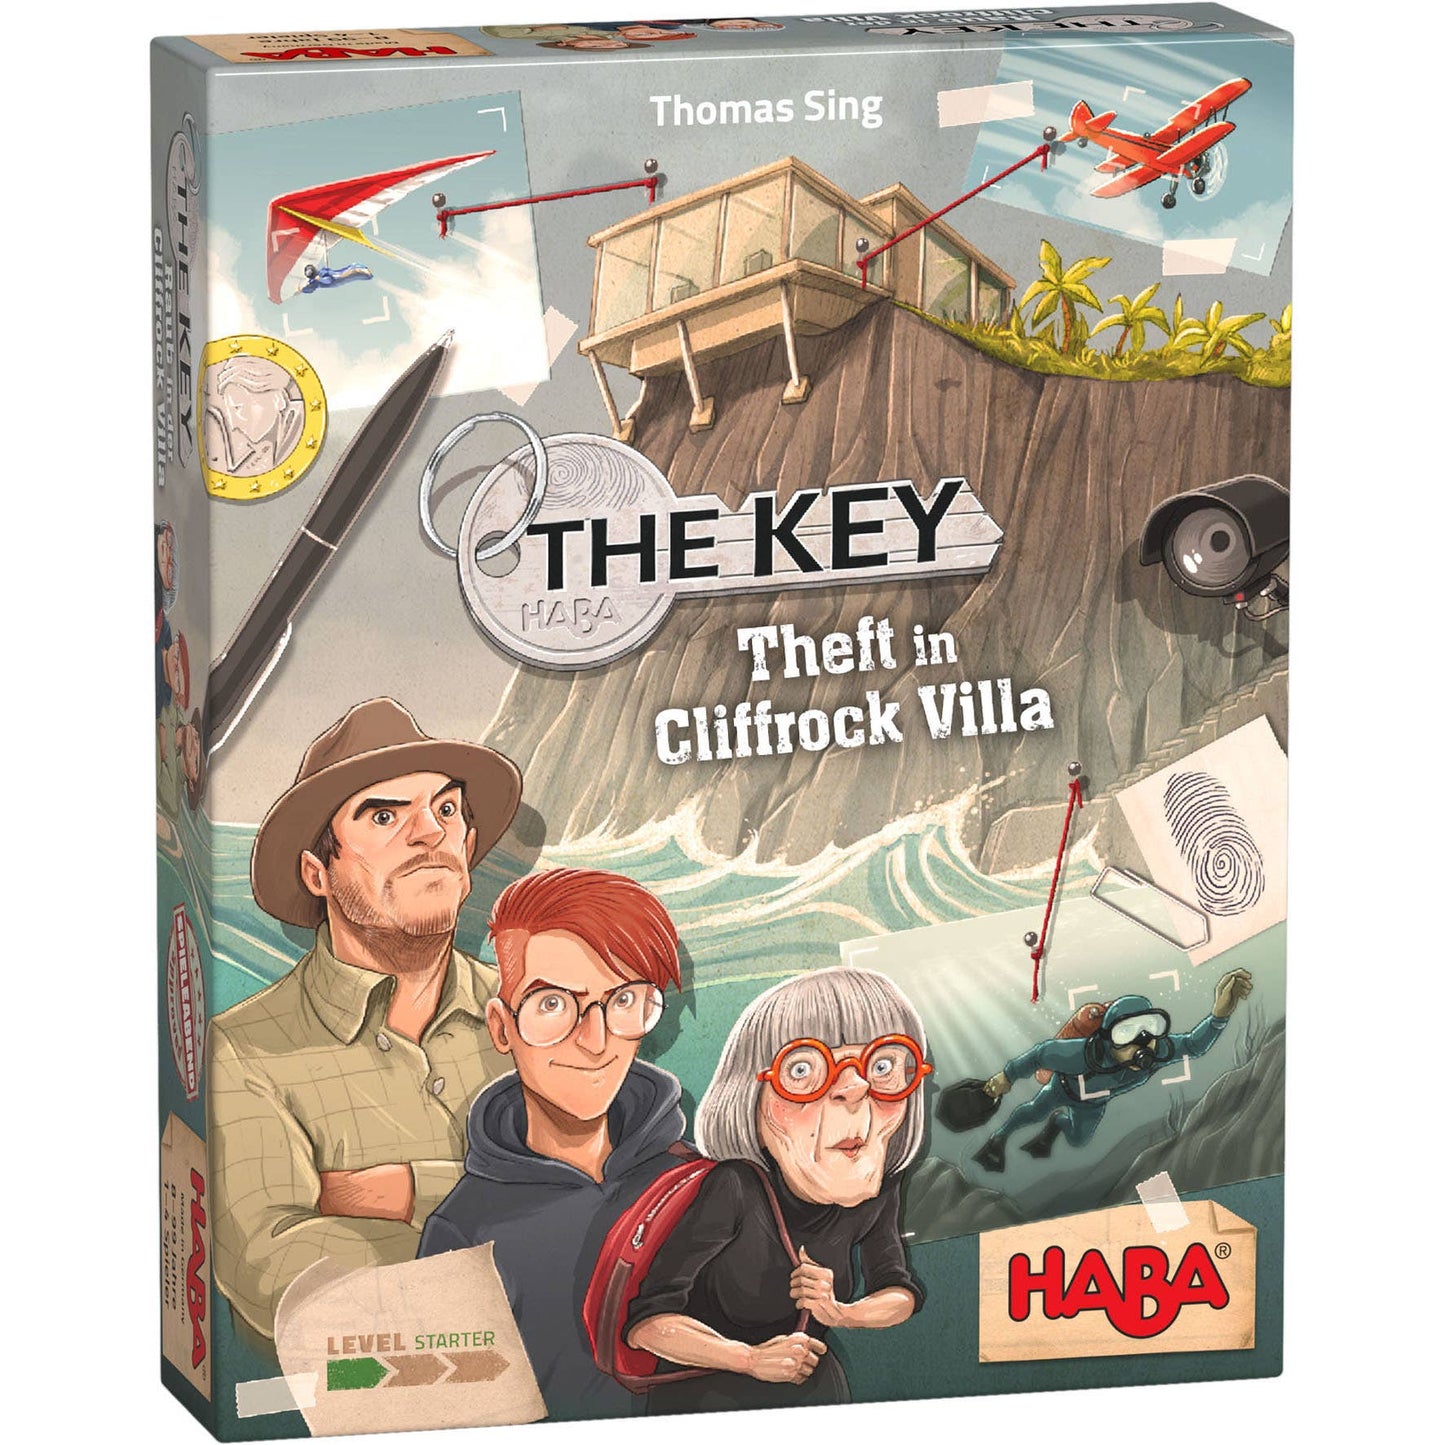 Game - The Key-Theft in Cliffrock Villa